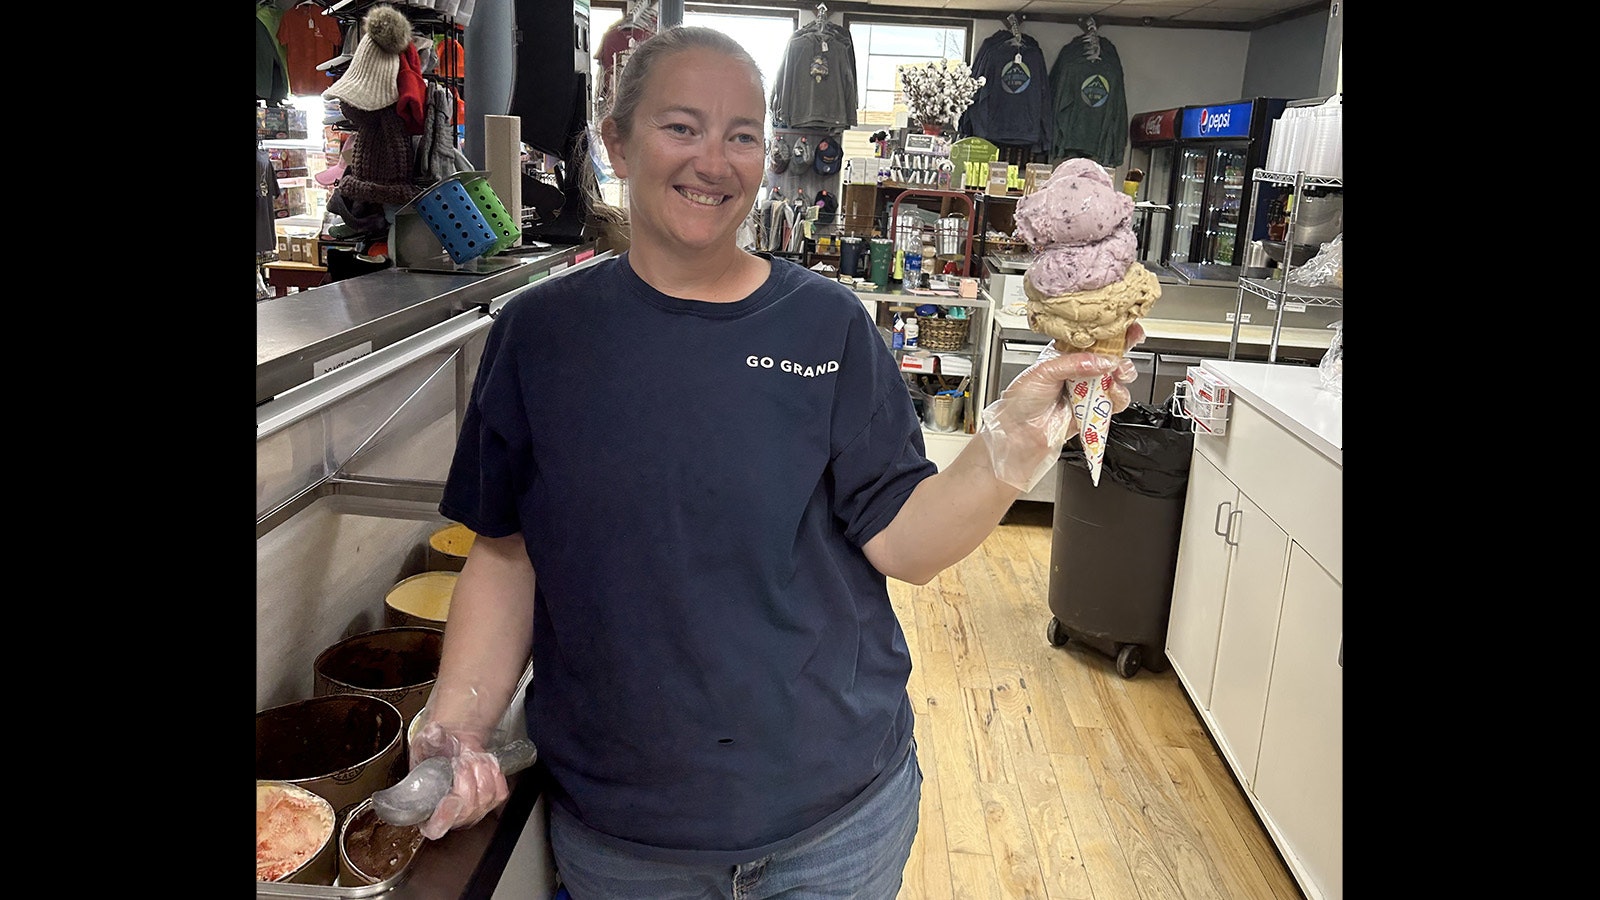 Katie Sims works at the Farson Mercantile. She's holding the store's signature Big Cone, with costs $10 and has nearly a half-gallon of ice cream.